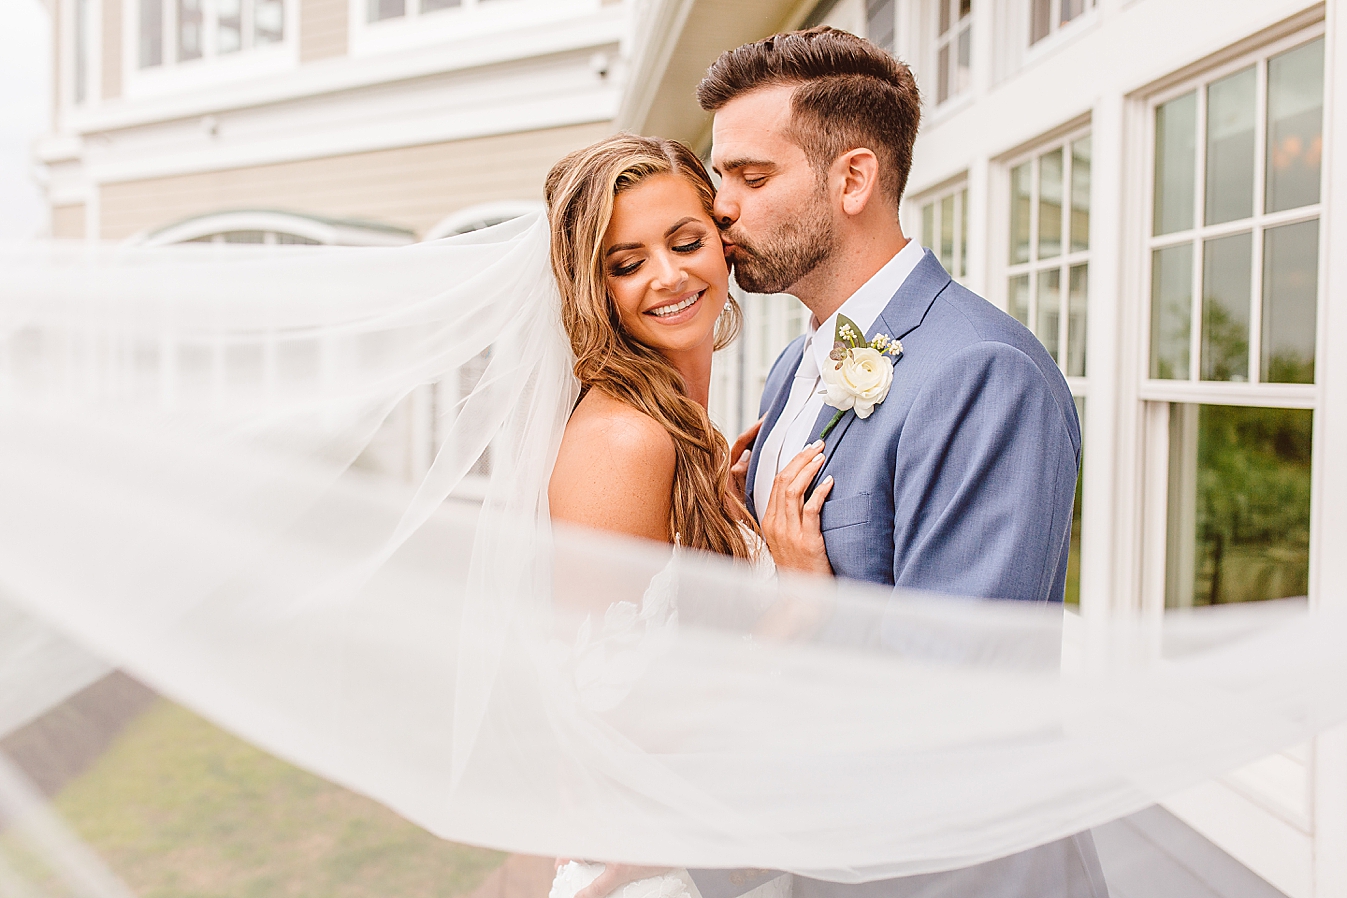 Bride and groom with veil flowing in wind | Brooke Michelle Photo